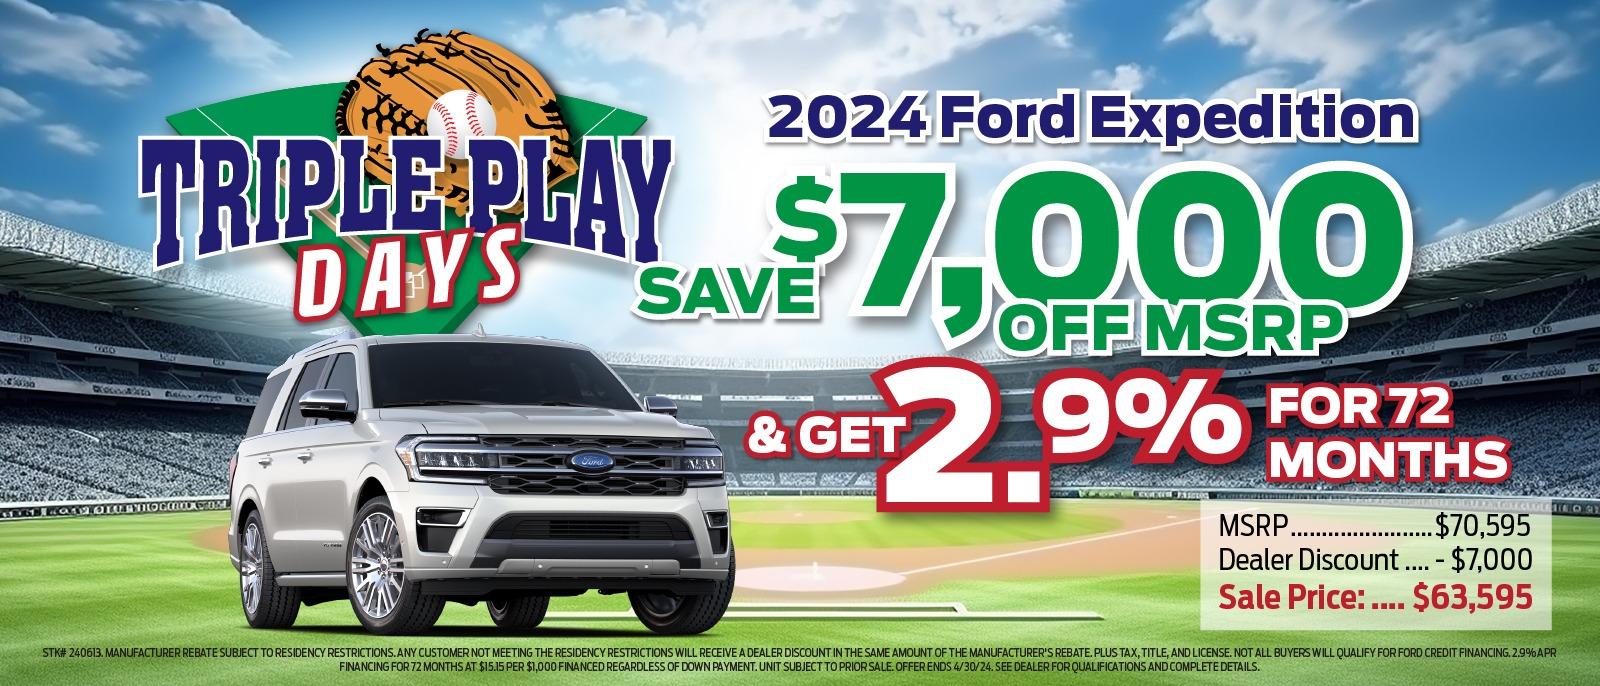 2024 Ford Expedition TRIPLE PLAY S DAYS SAVE $7,000 & GET OFF MSRP 2.9% FOR 72 MONTHS MSRP. .$70,595 Dealer Discount .... - $7,000 Sale Price : .... $63,595 STK# 240613. MANUFACTURER REBATE SUBJECT TO RESIDENCY RESTRICTIONS. ANY CUSTOMER NOT MEETING THE RESIDENCY RESTRICTIONS WILL RECEIVE A DEALER DISCOUNT IN THE SAME AMOUNT OF THE MANUFACTURER'S REBATE. PLUS TAX, TITLE, AND LICENSE. NOT ALL BUYERS WILL QUALIFY FOR FORD CREDIT FINANCING. 2.9% APR FINANCING FOR 72 MONTHS AT $15.15 PER $1,000 FINANCED REGARDLESS OF DOWN PAYMENT. UNIT SUBJECT TO PRIOR SALE. OFFER ENDS 4/30/24. SEE DEALER FOR QUALIFICATIONS AND COMPLETE DETAILS.